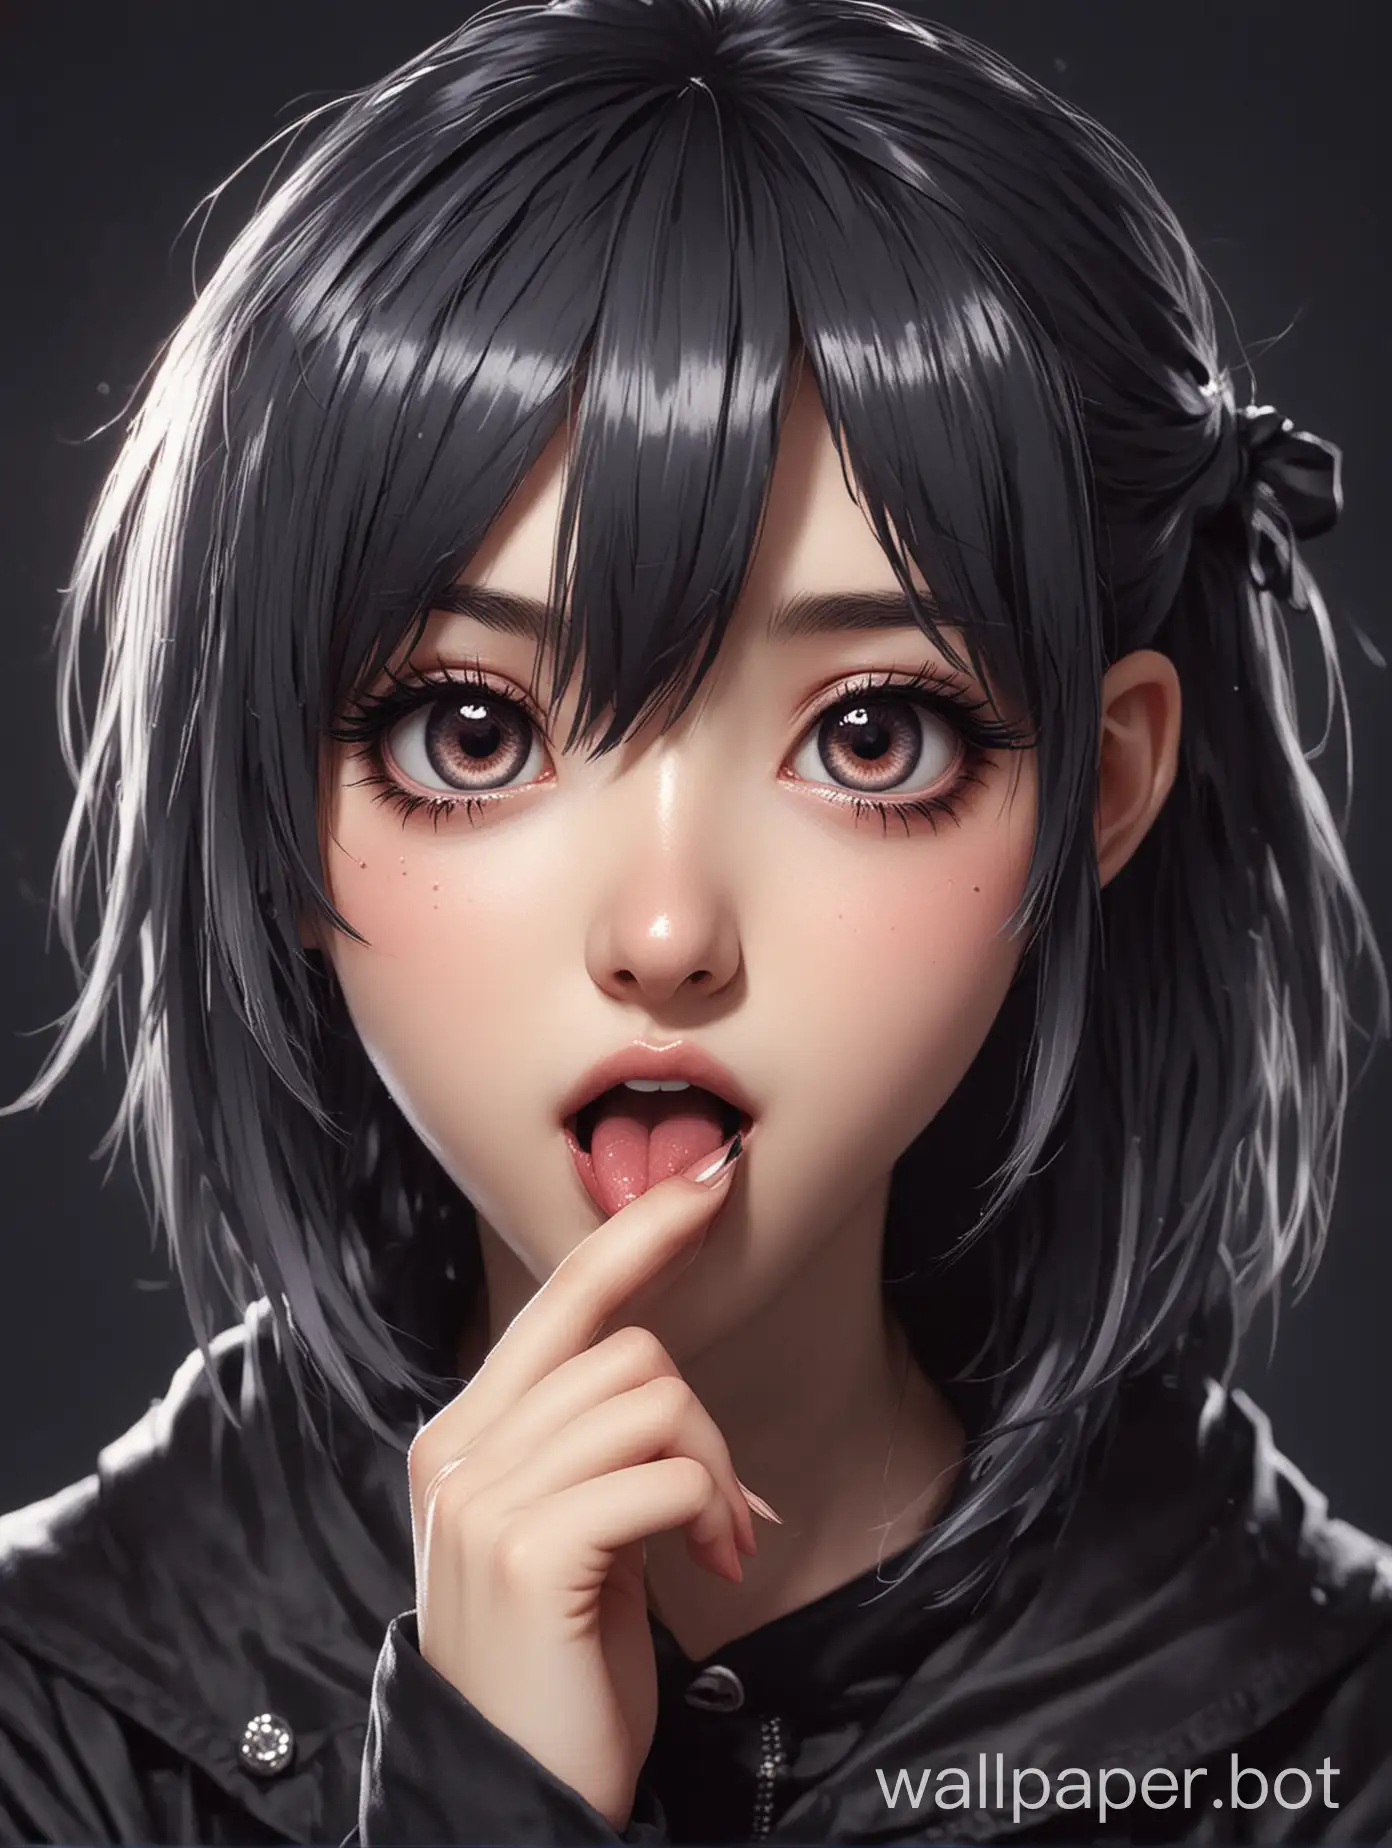 Make a cute anime girl with small tongue out and abit gothand hand at cheek